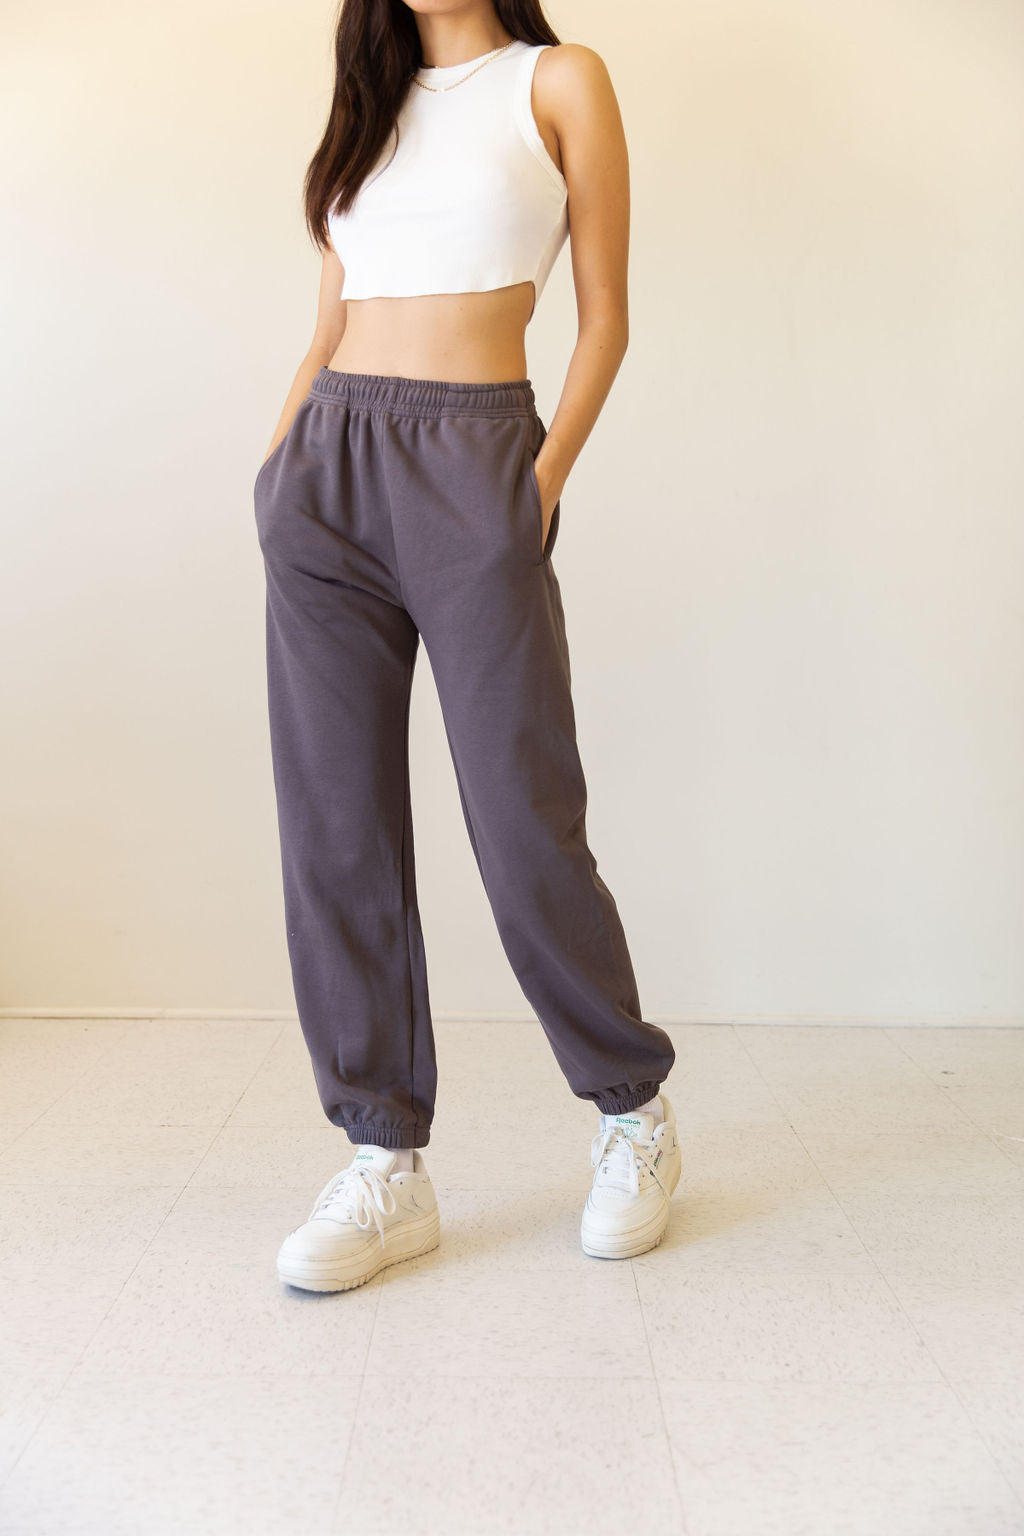 Over It High Rise Jogger Pants